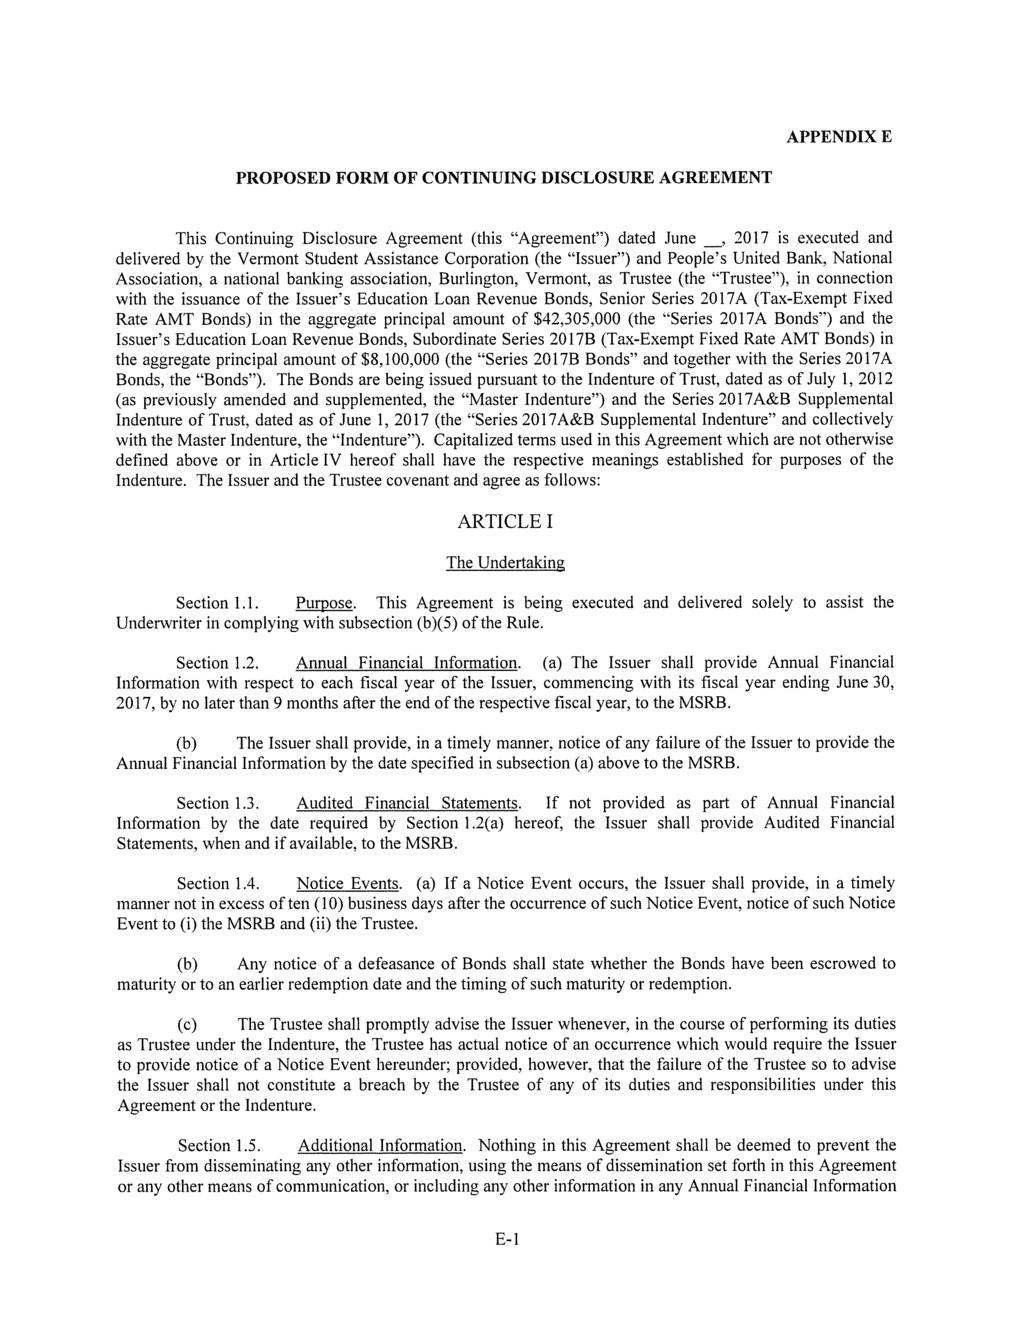 APPENDIXE PROPOSED FORM OF CONTINUING DISCLOSURE AGREEMENT This Continuing Disclosure Agreement (this "Agreement") dated June _, 2017 is executed and delivered by the Vermont Student Assistance